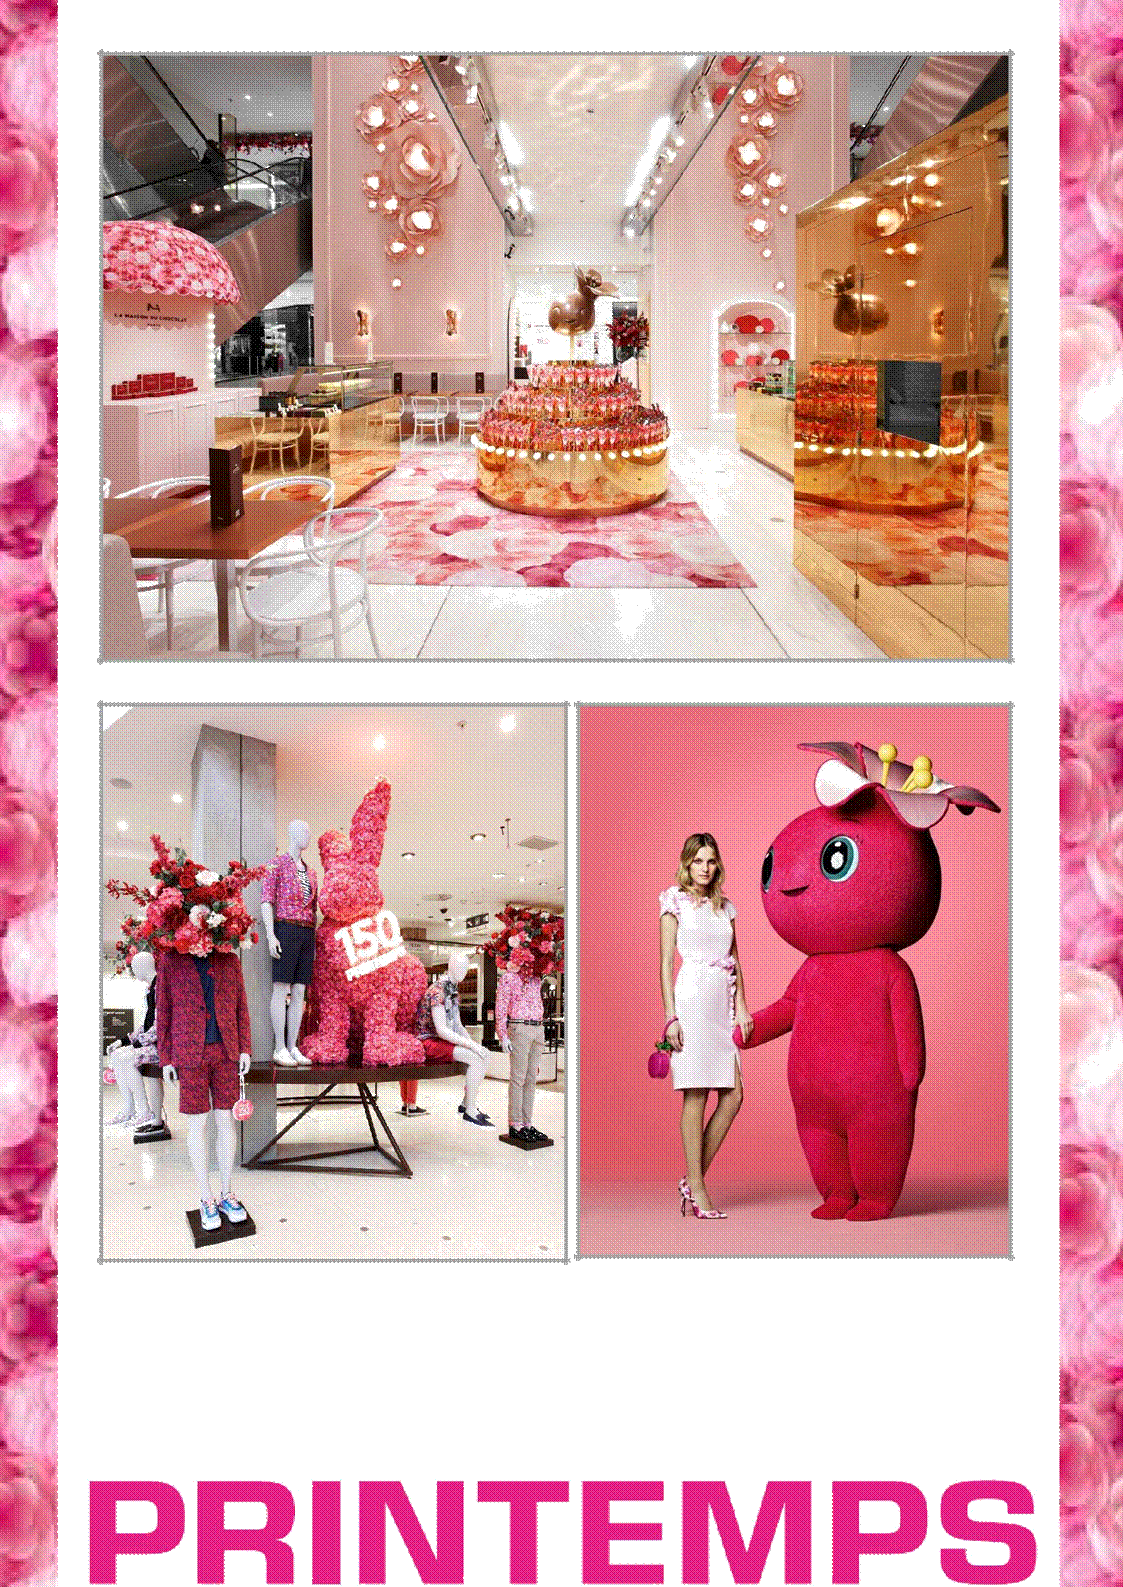 Printemps launches the festivities for its 150th anniversary